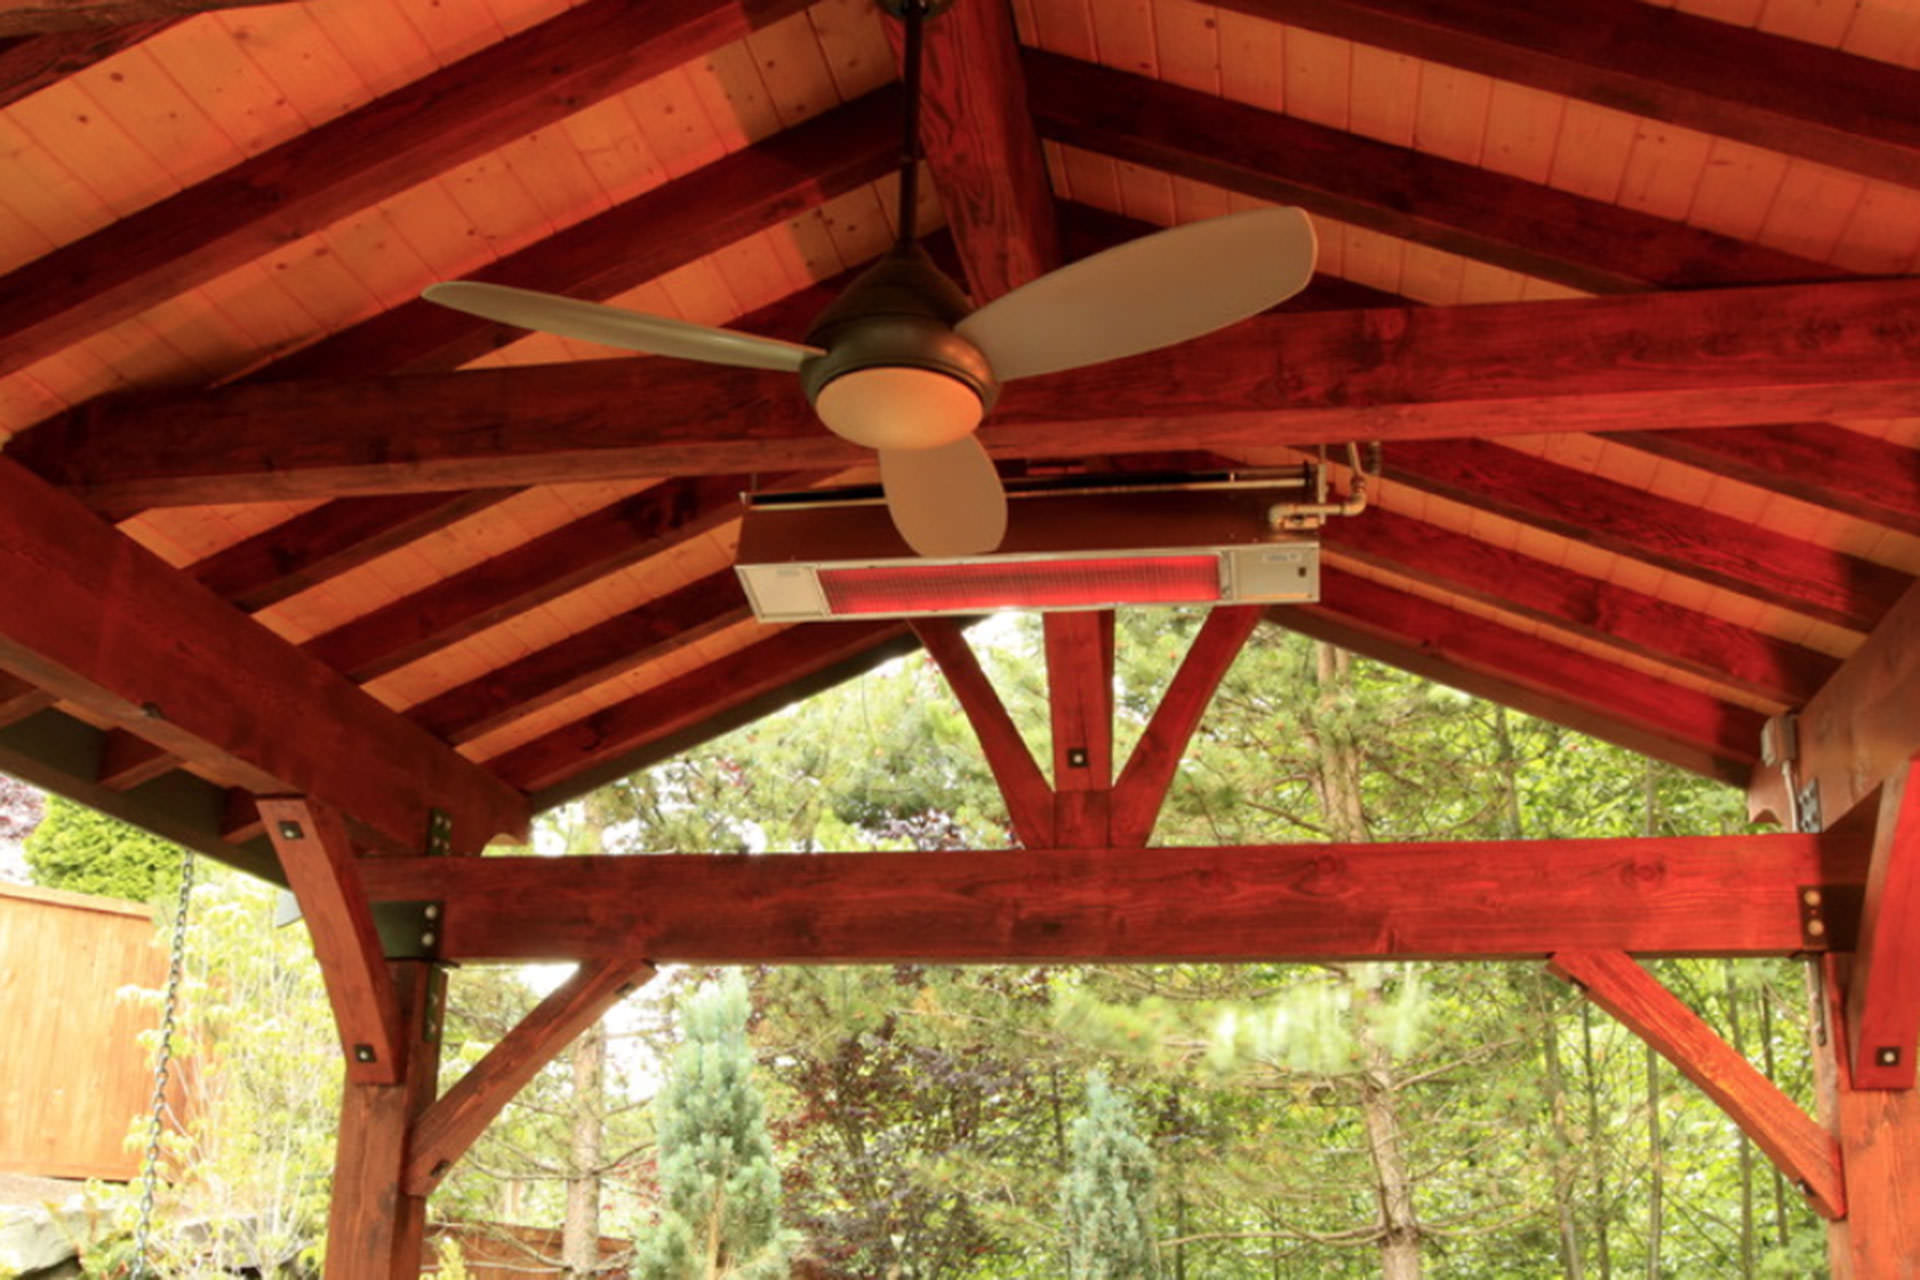 Fan and heater fixed to an outdoor structure